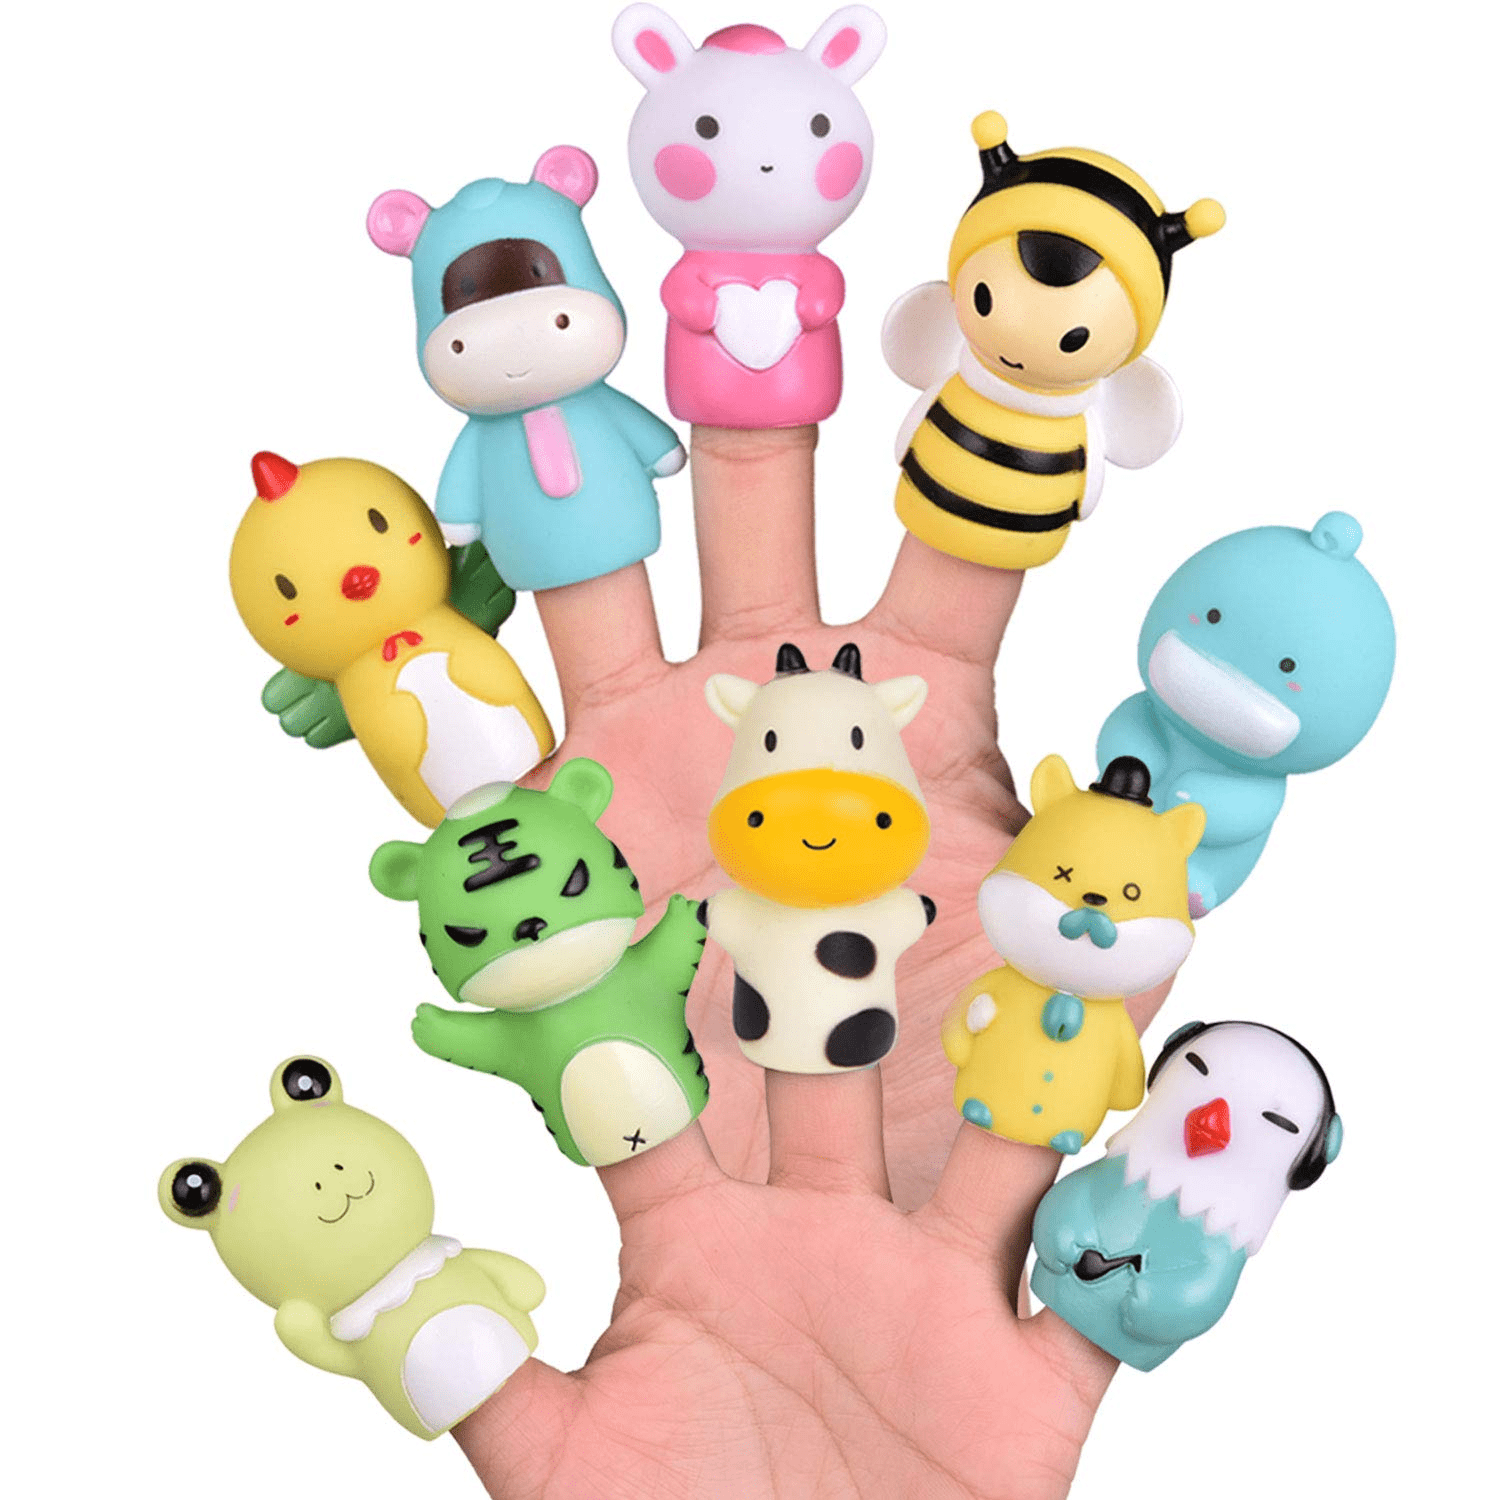 New Spring 5 Finger Puppets Animals Lamb Bunny Frog Chick Easter Bath Toy 